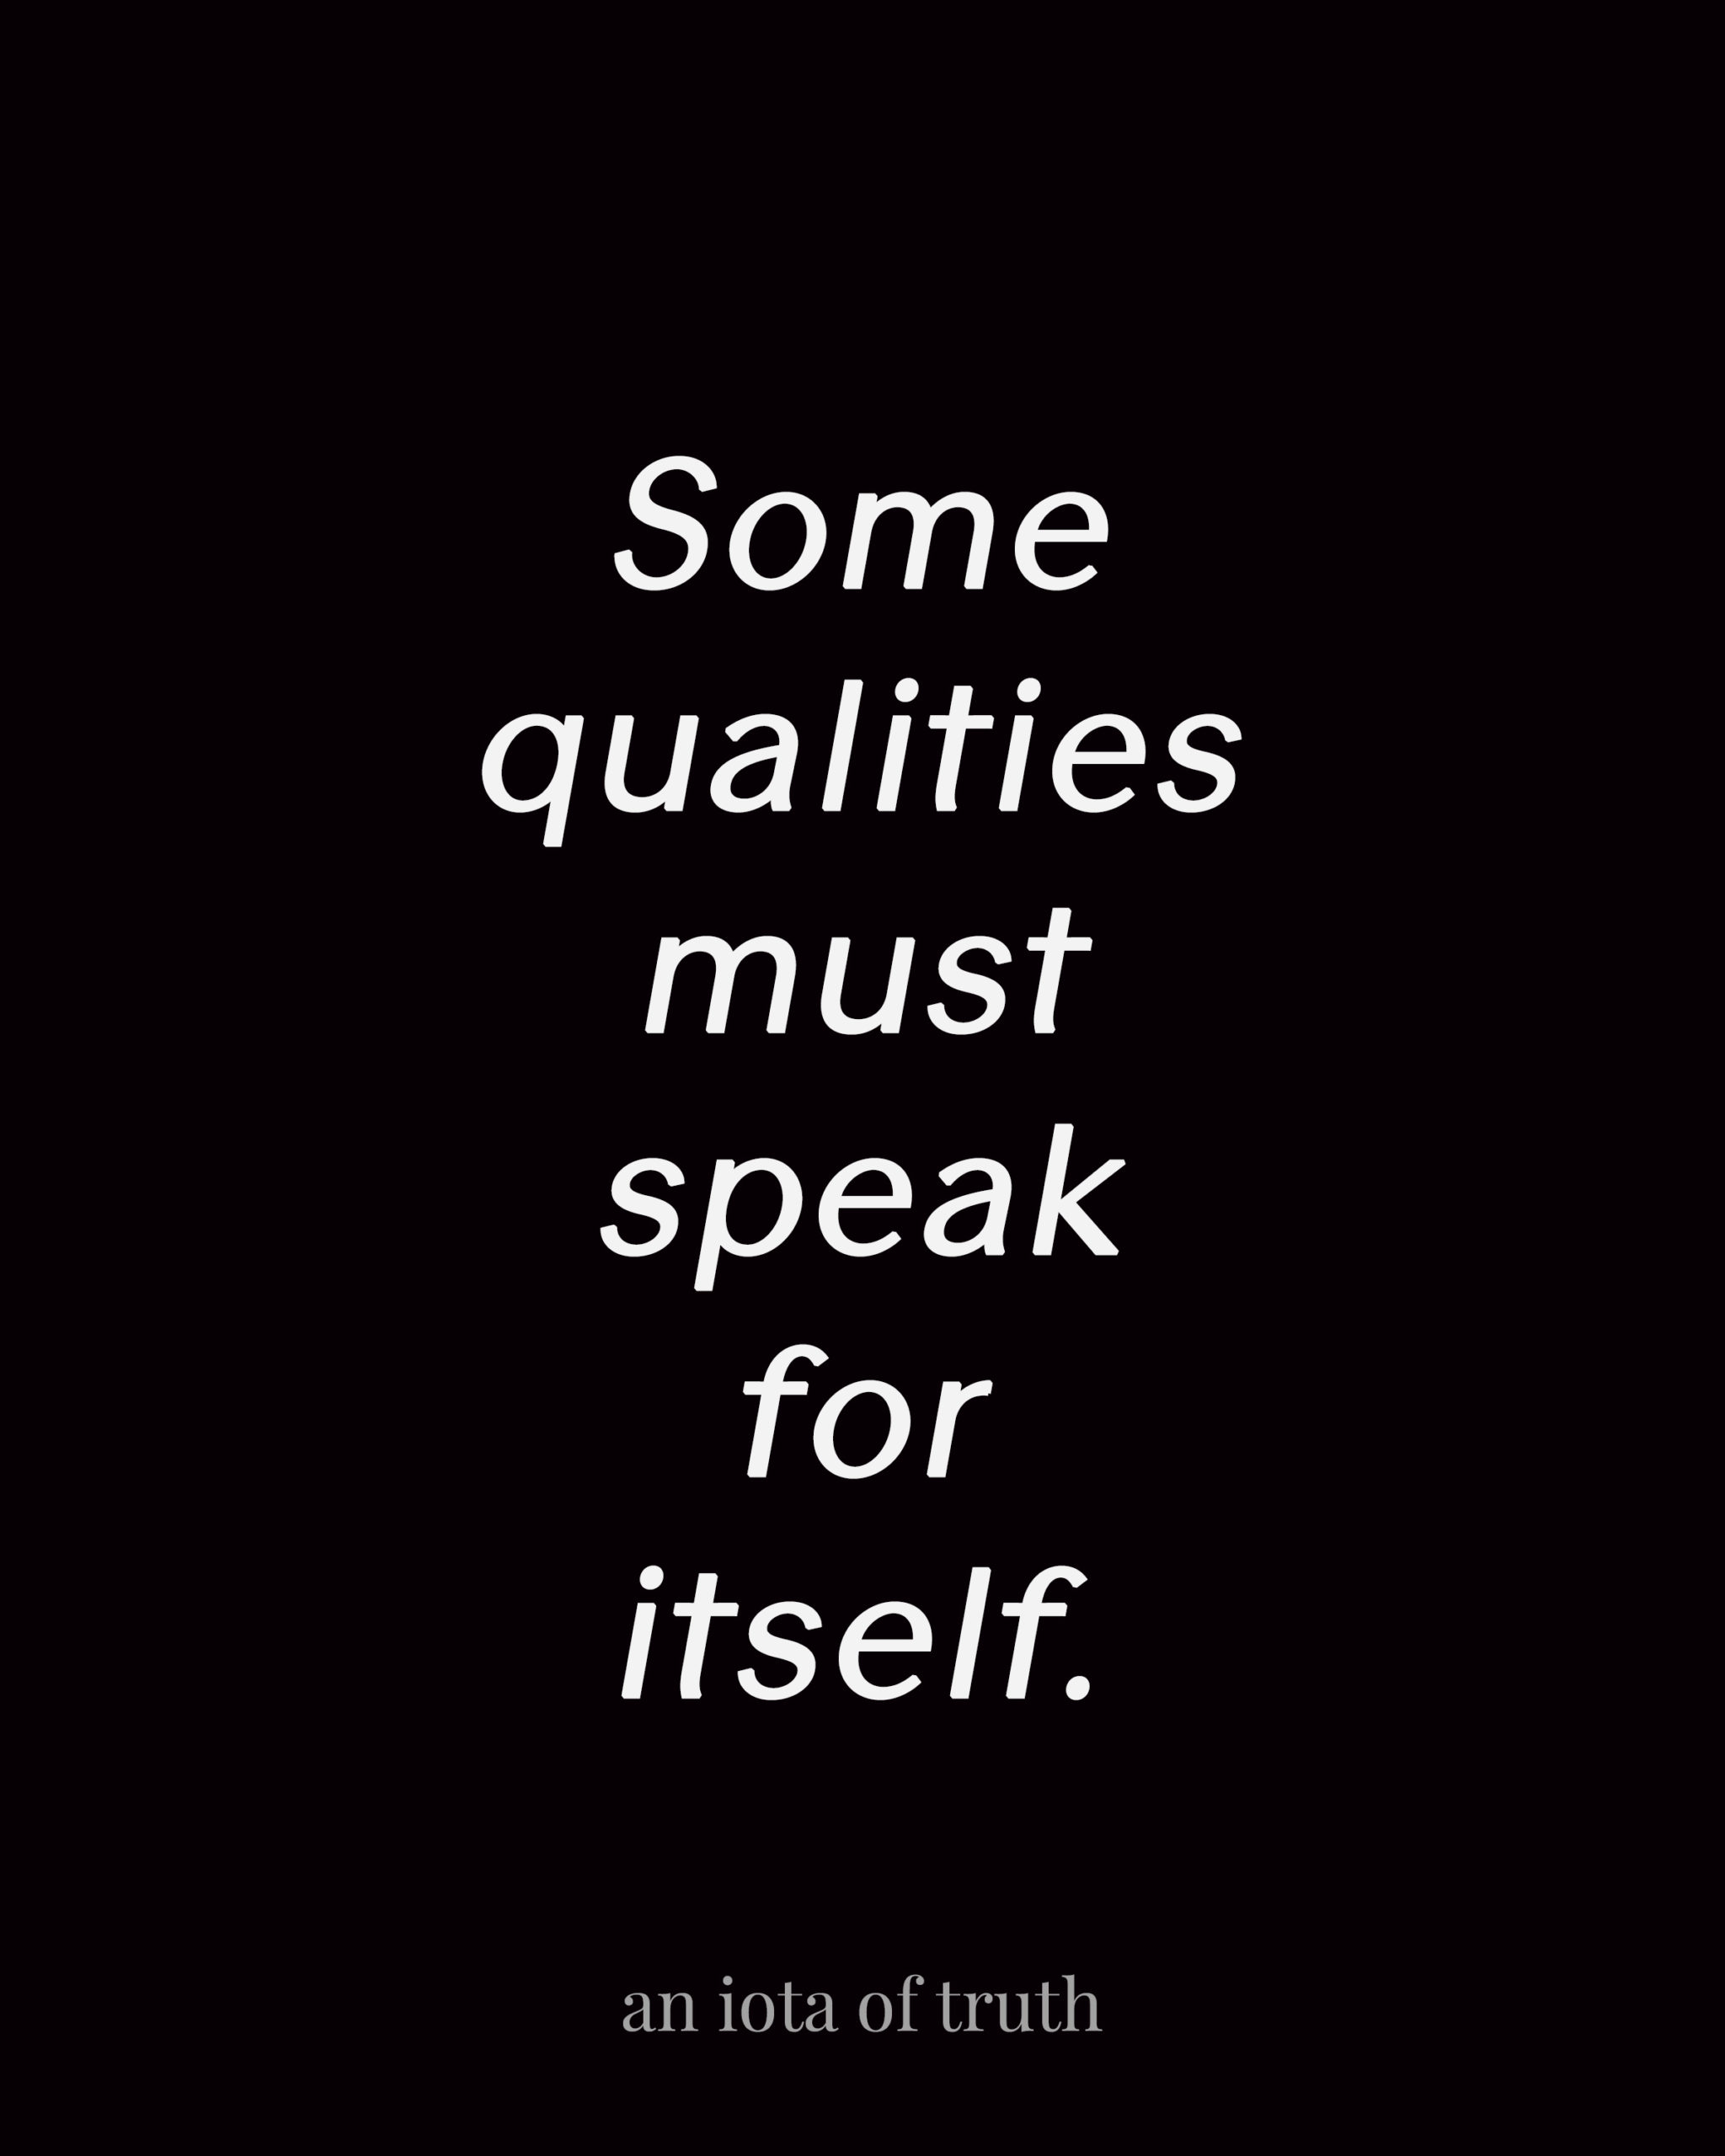 Some qualities must speak for itself.